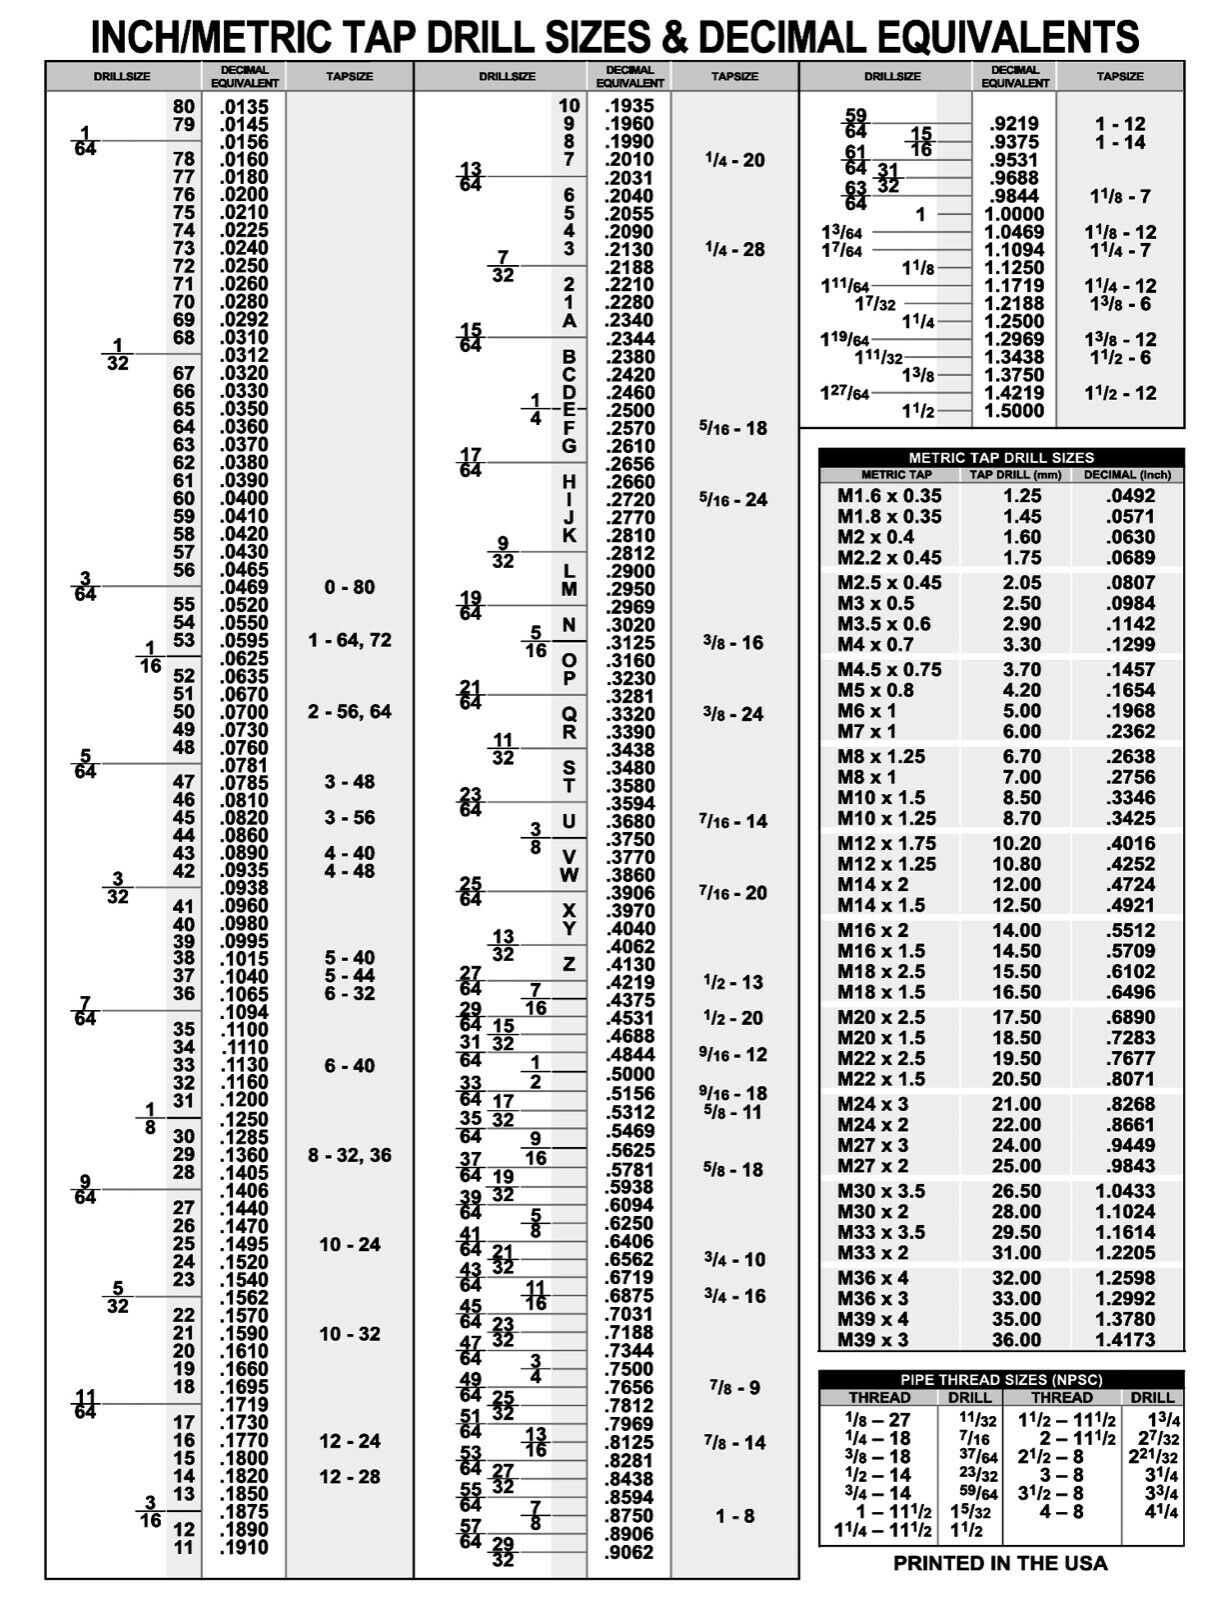 Decimal Chart Inch/metric Tap Drill Sizes Equivalents 8 1/2 X 11 Card Laminated